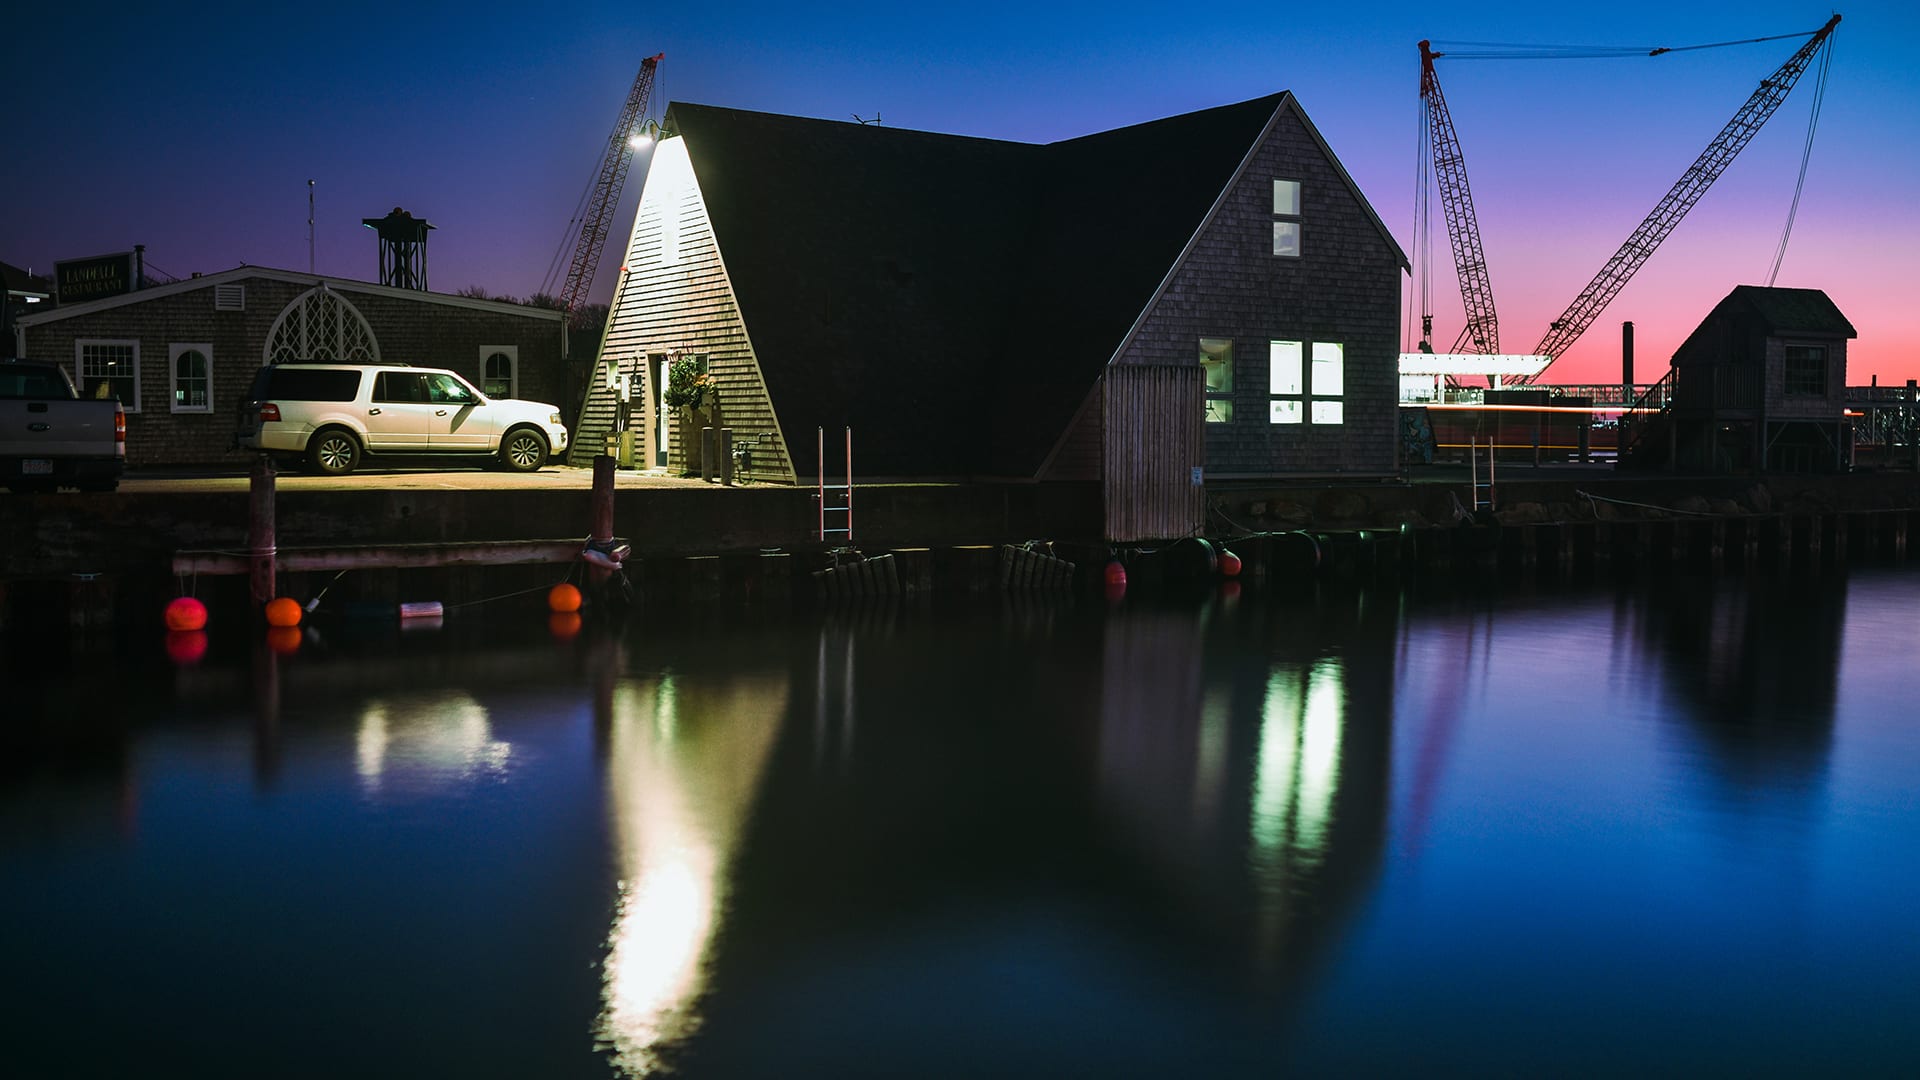 Dyer's Hangar sits just five feet above resting sea level in Woods Hole (© Daniel Hentz Photography)